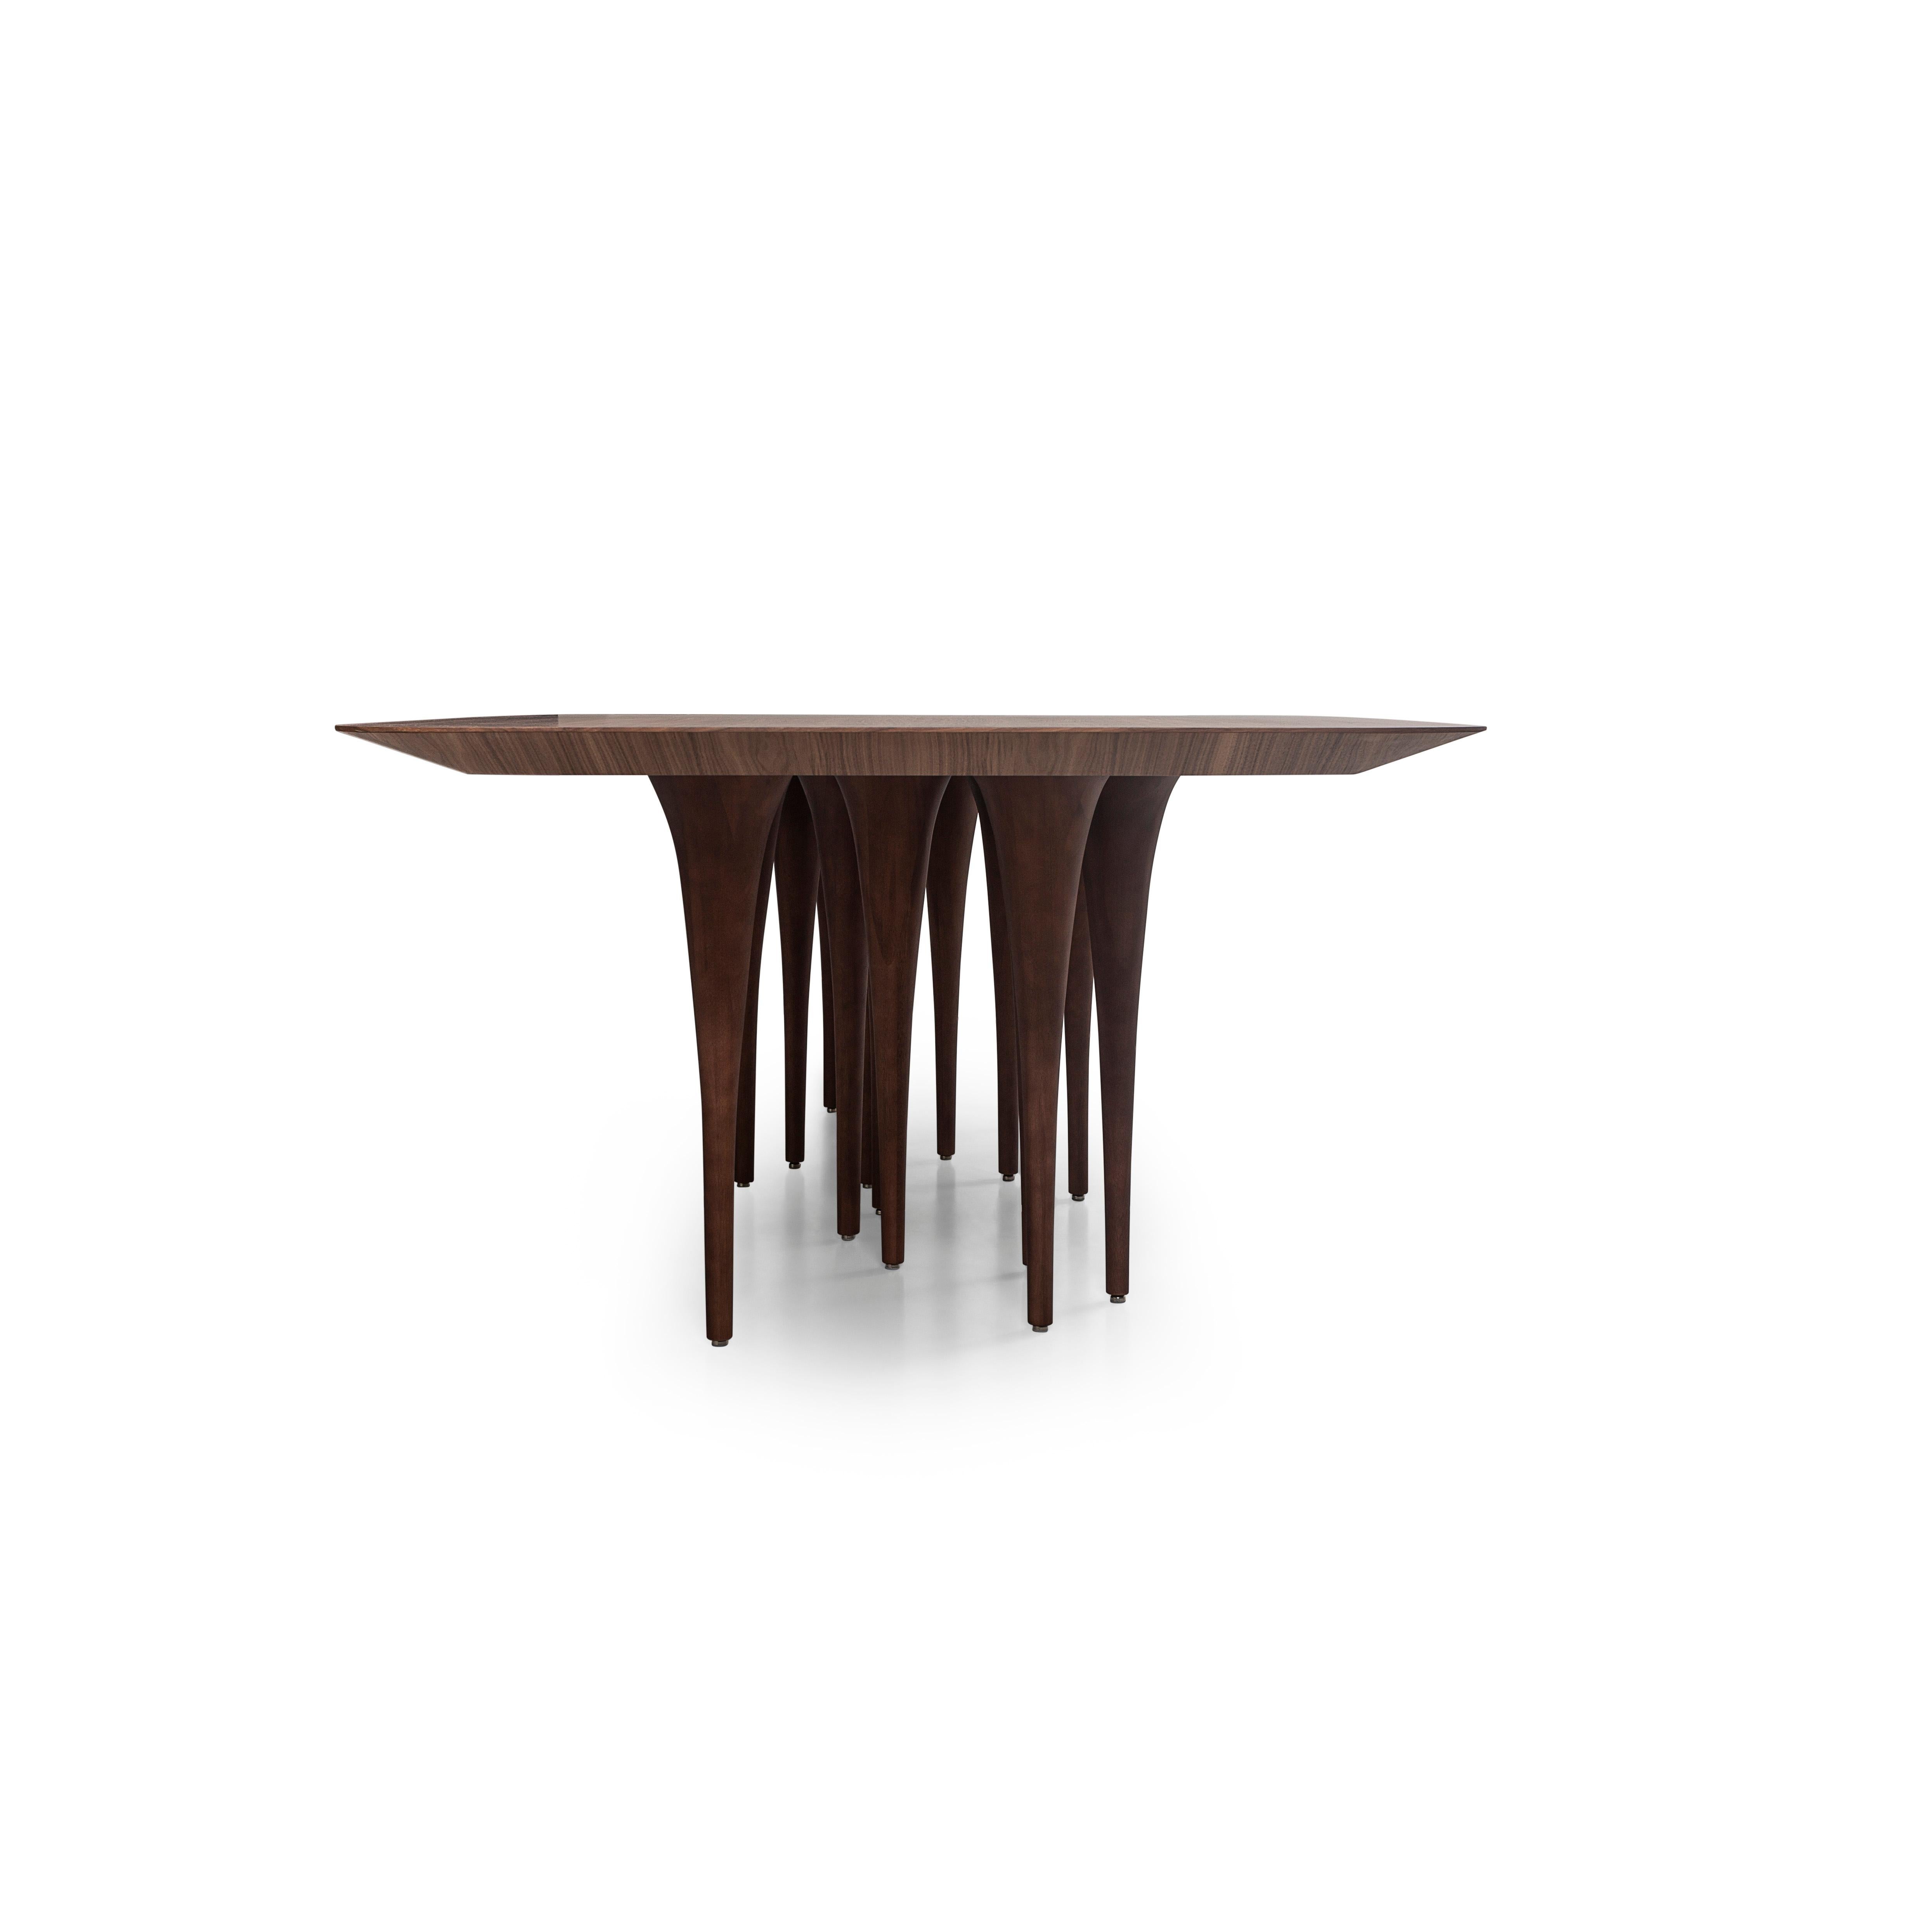 Brazilian Pin Dining Table with a Walnut Wood Veneered Table Top and 16 Legs 118'' For Sale